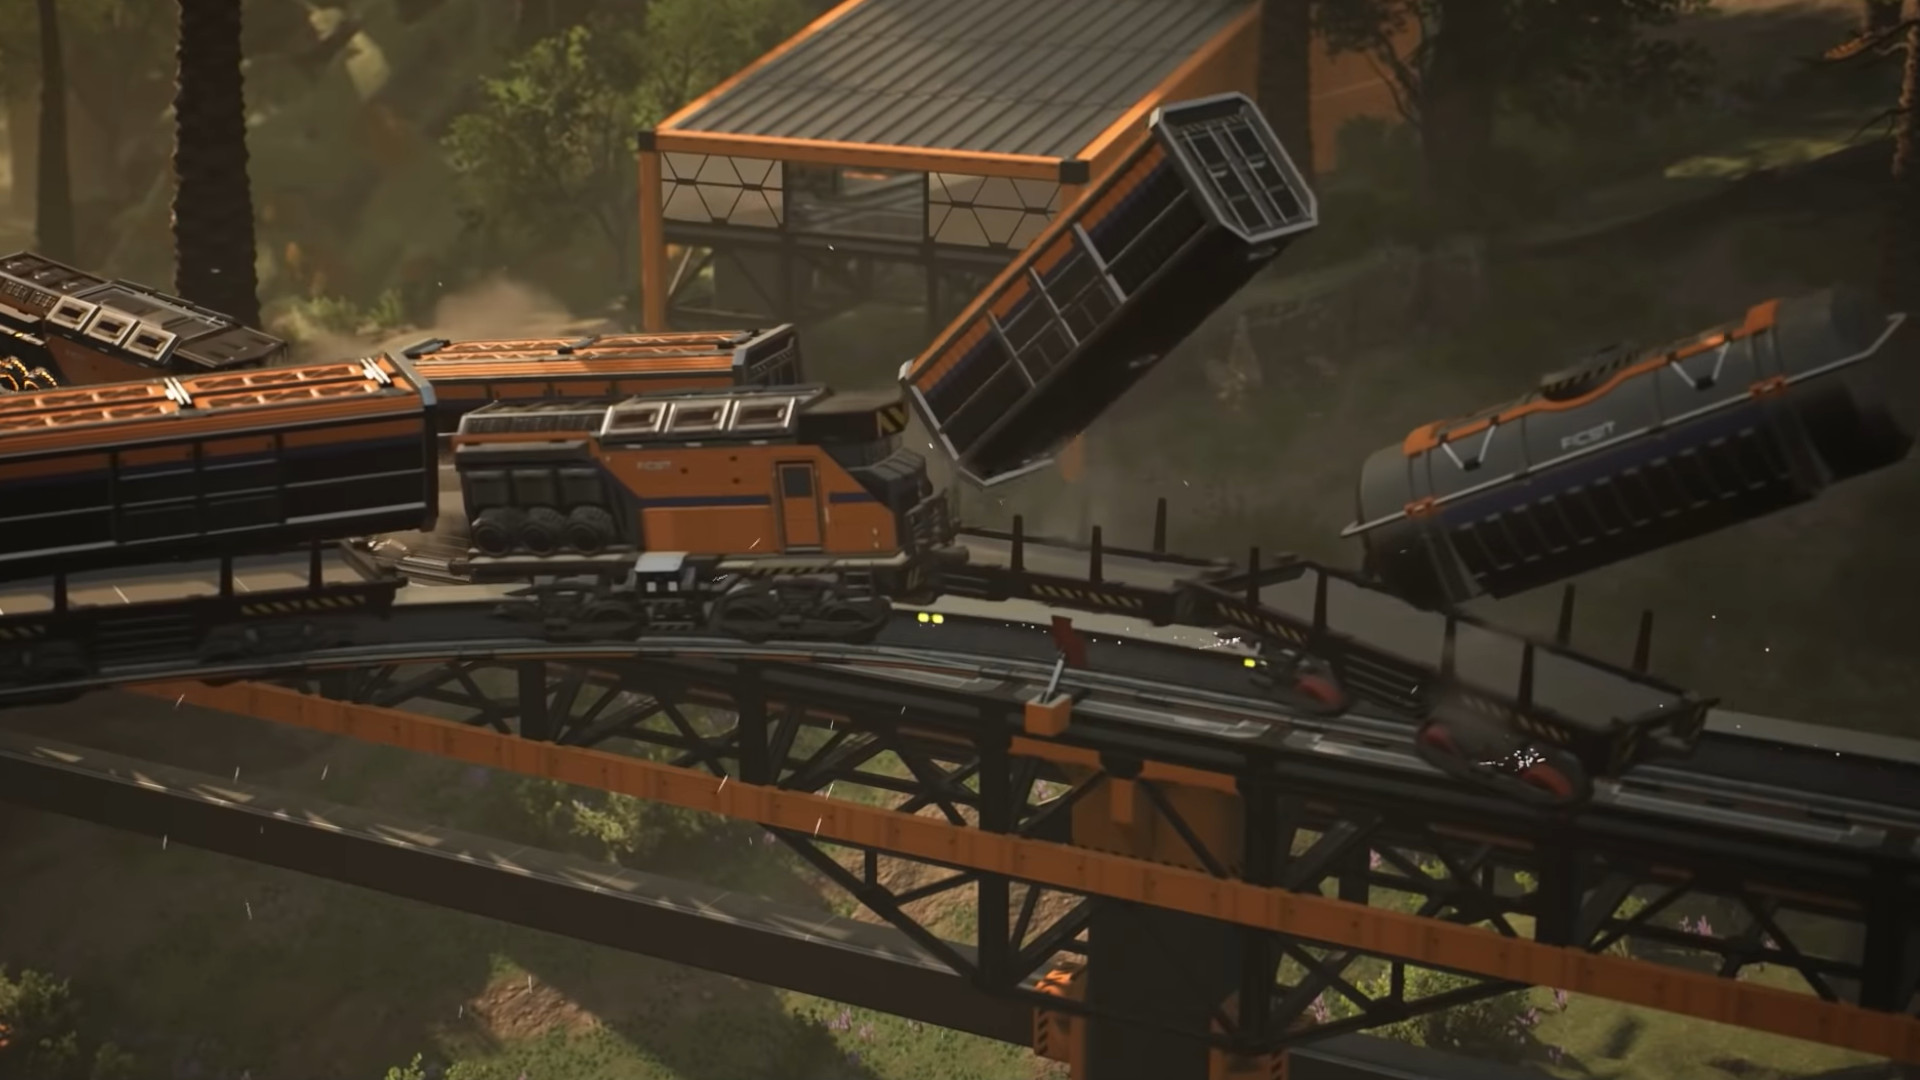 Satisfactory's new train collisions look like absolute carnage